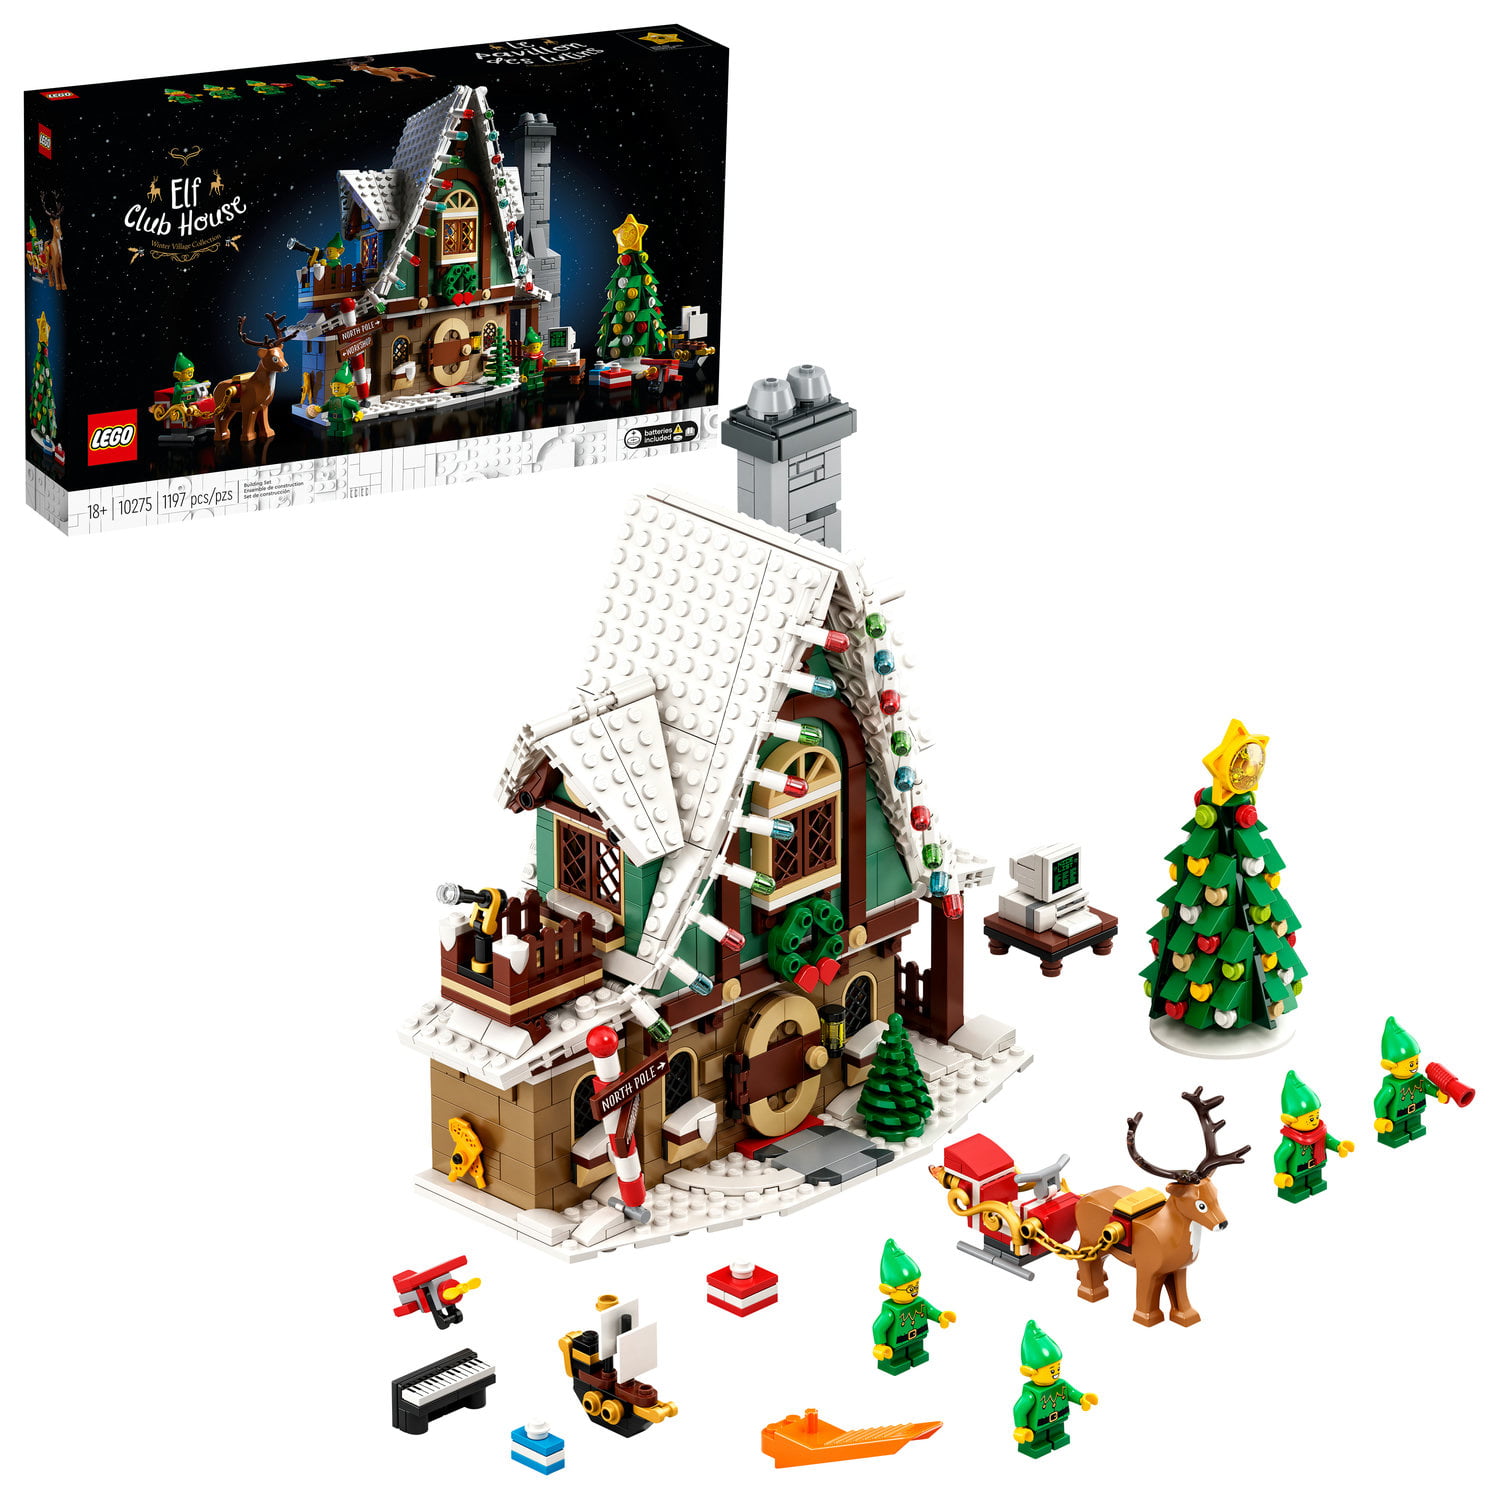 LEGO Elf Club House 10275; An Engaging Building Toy for Adults ...